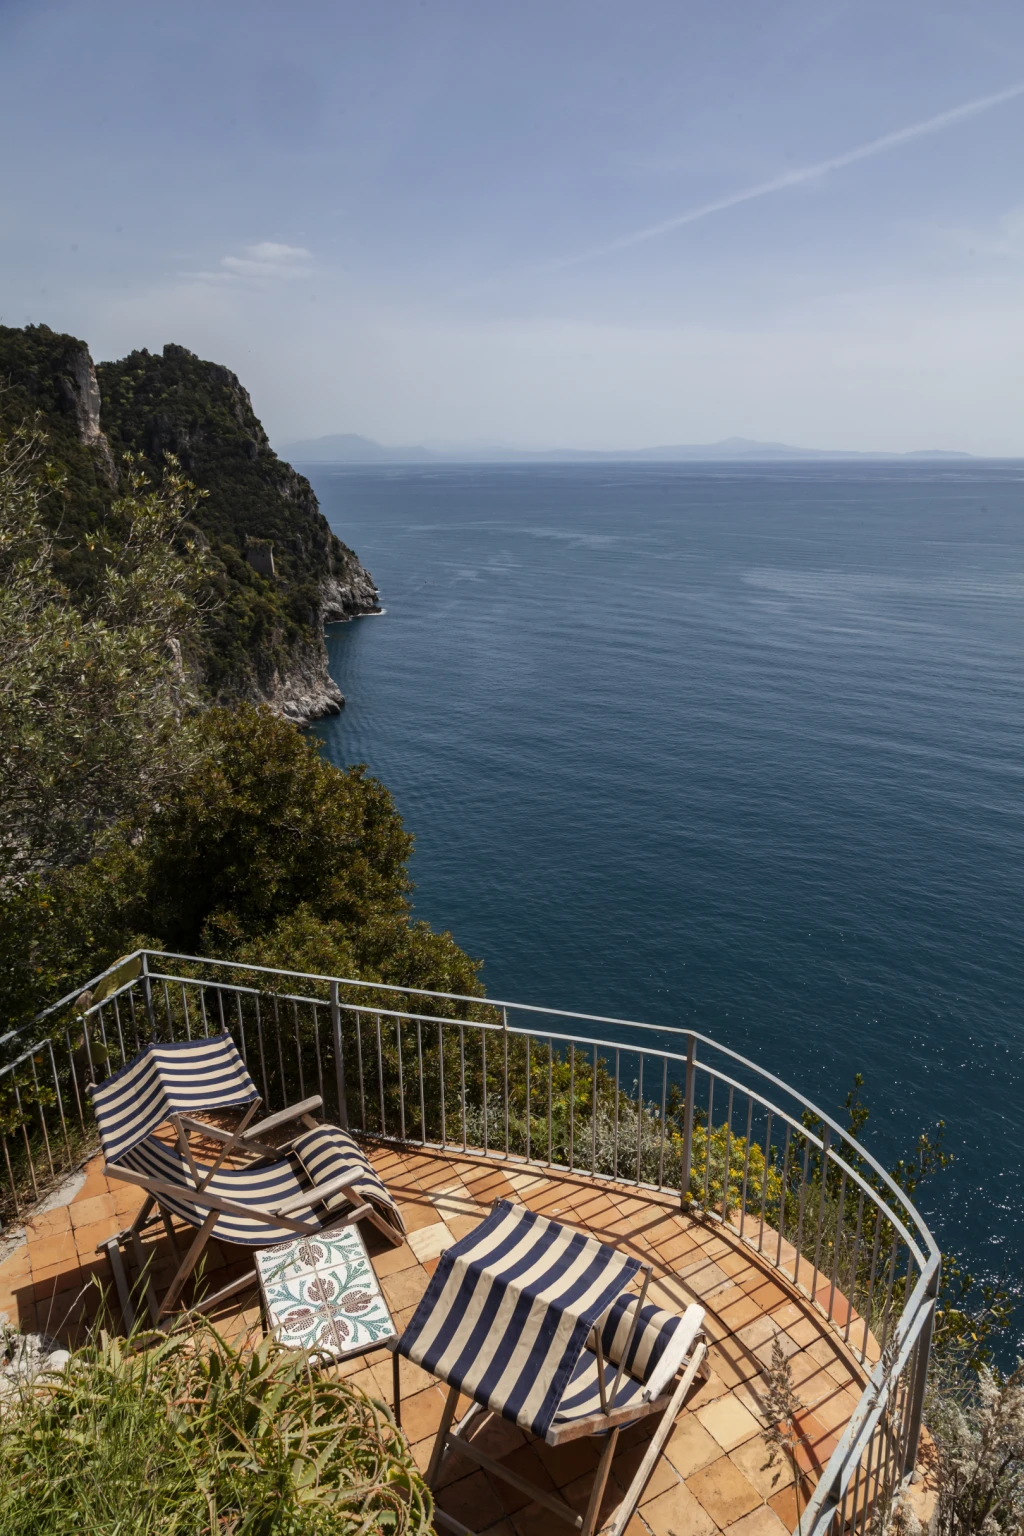 The views from the balcony, overlooking the Amalfi Coast is simply stunning